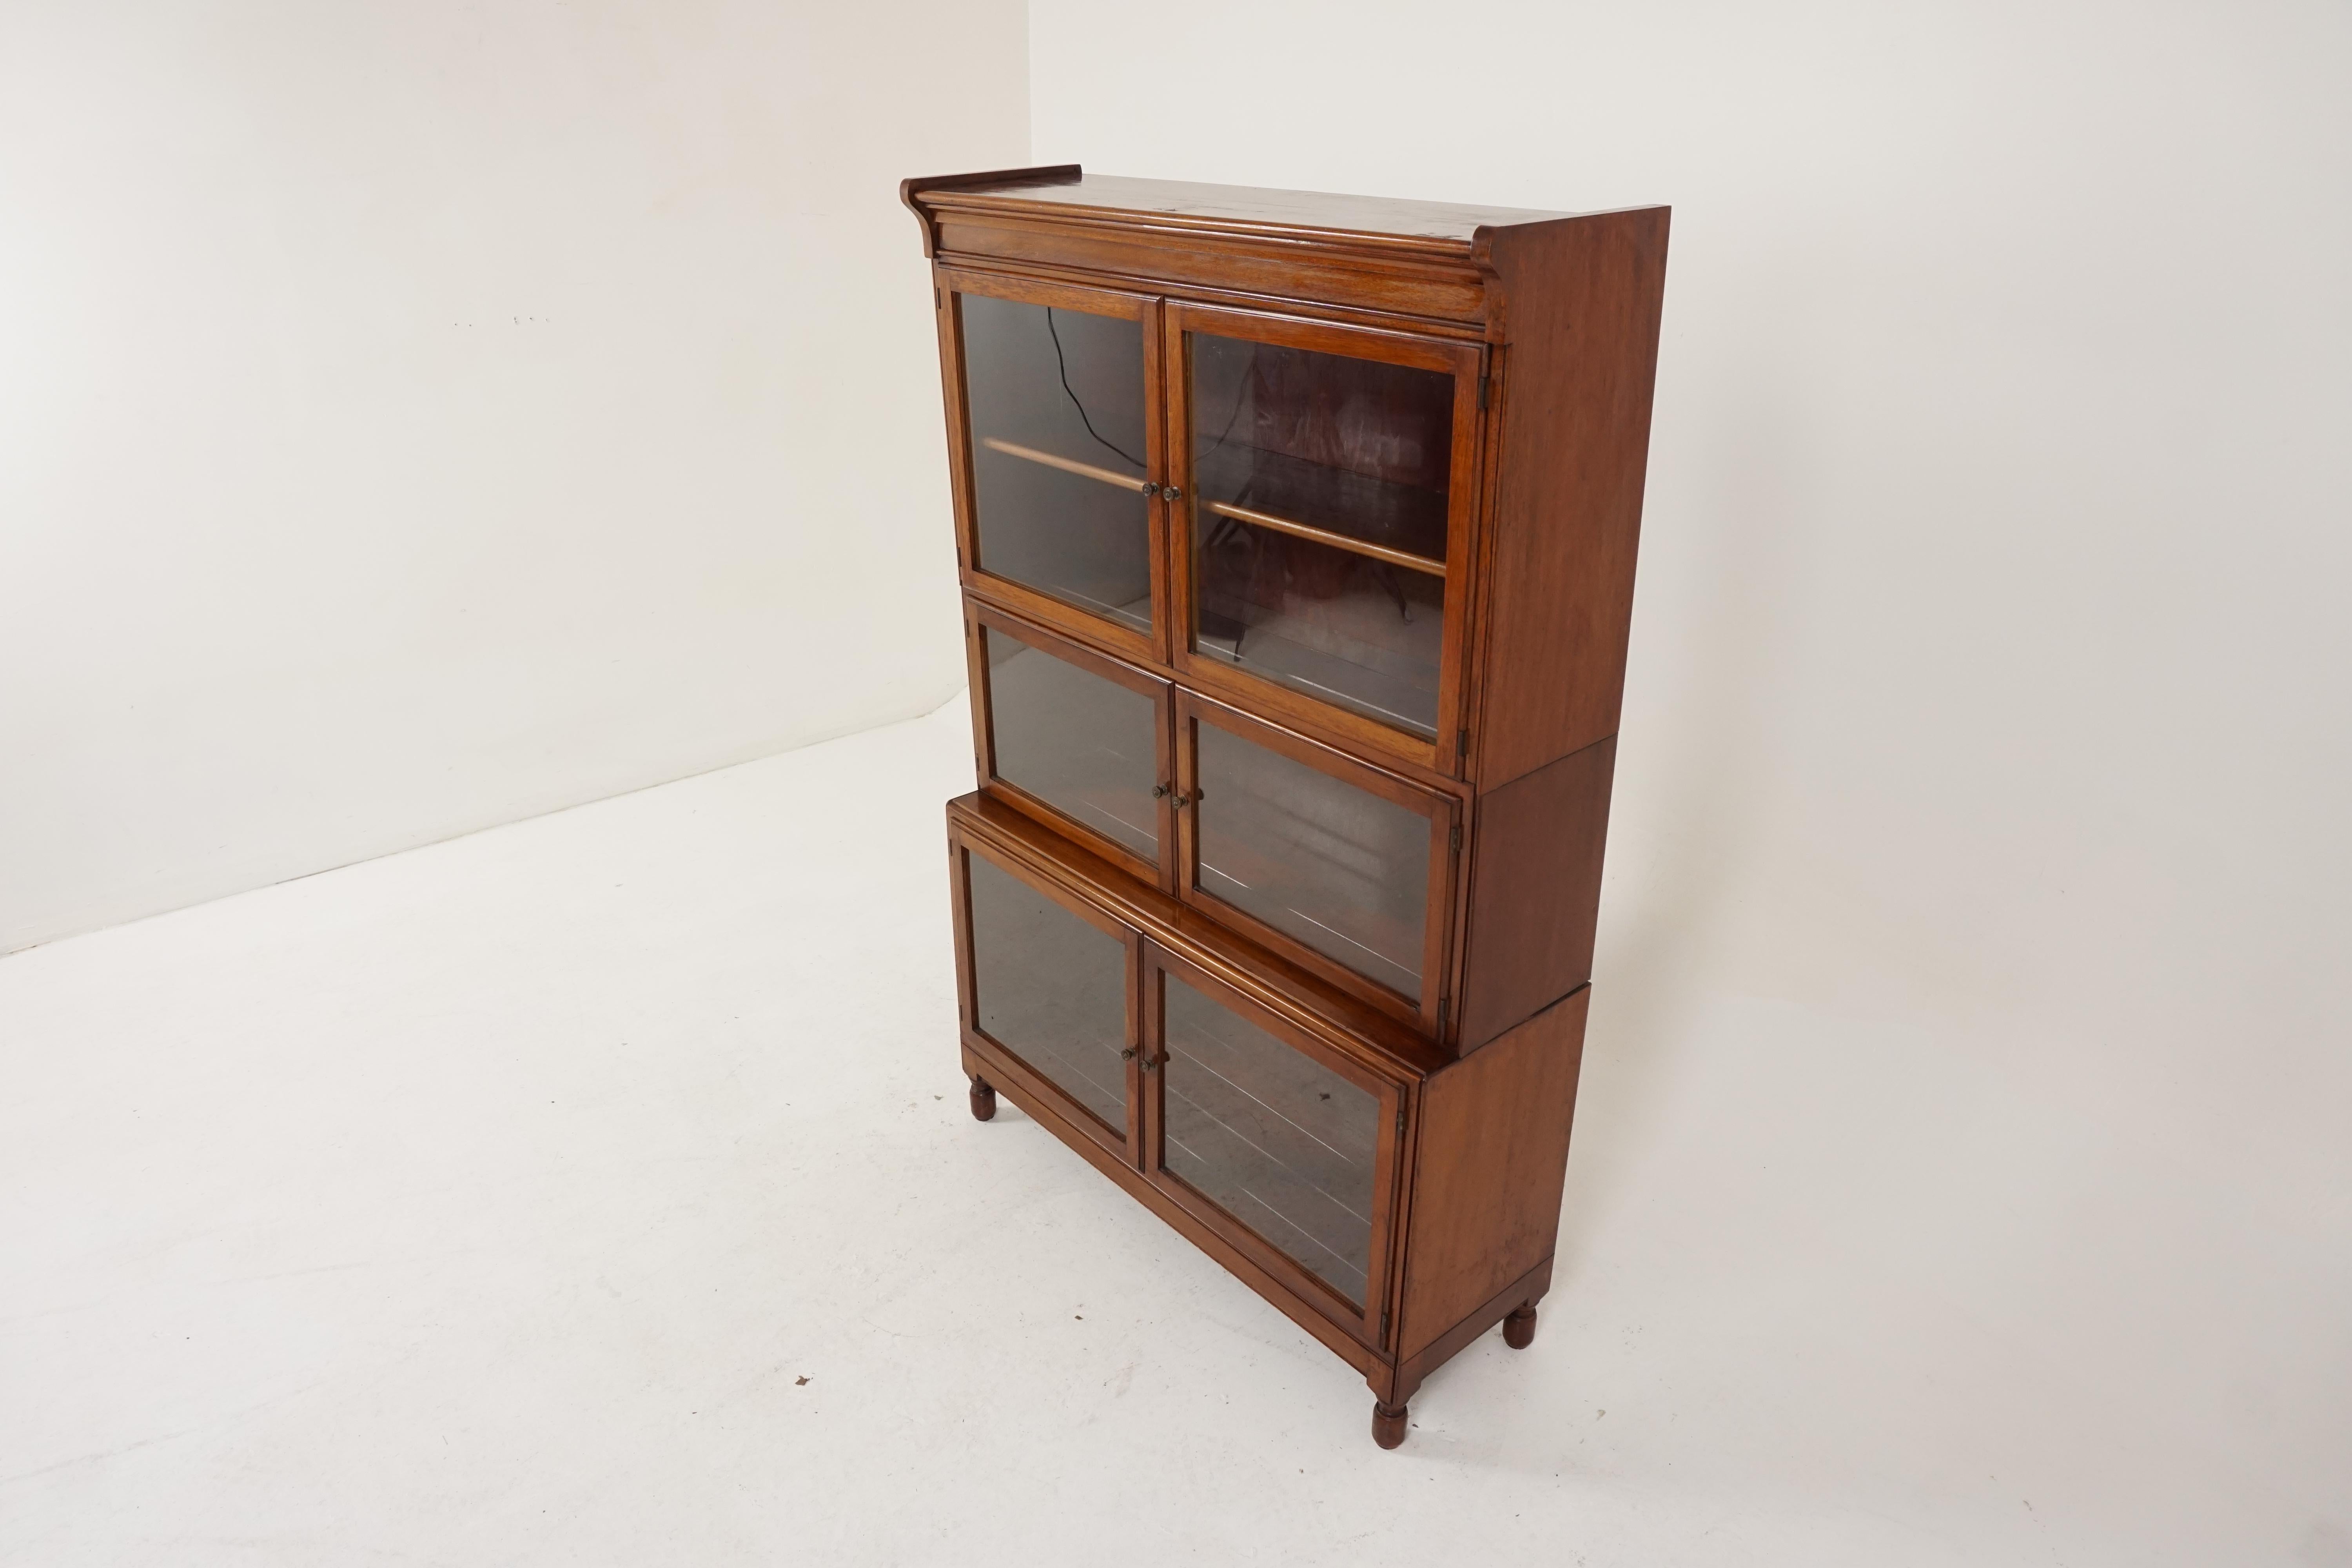 Hand-Crafted Antique Walnut Bookcase, Lawyer Sectional Bookcase by Minty, 1920